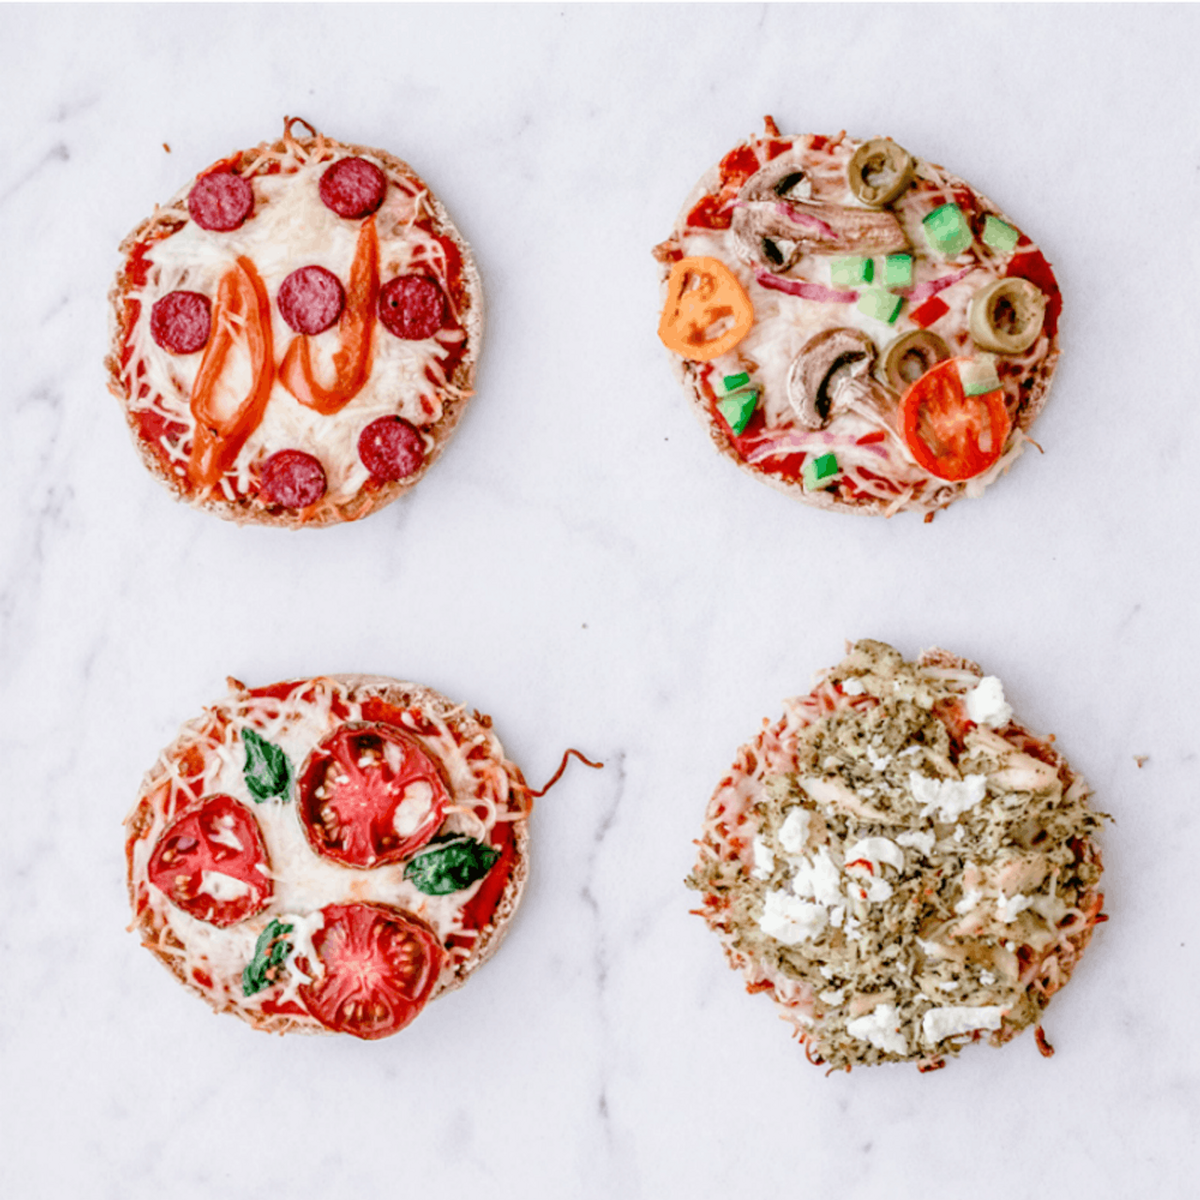 Cheap and Easy: This Game Day Mini Pizzas Recipe Will Please Everyone